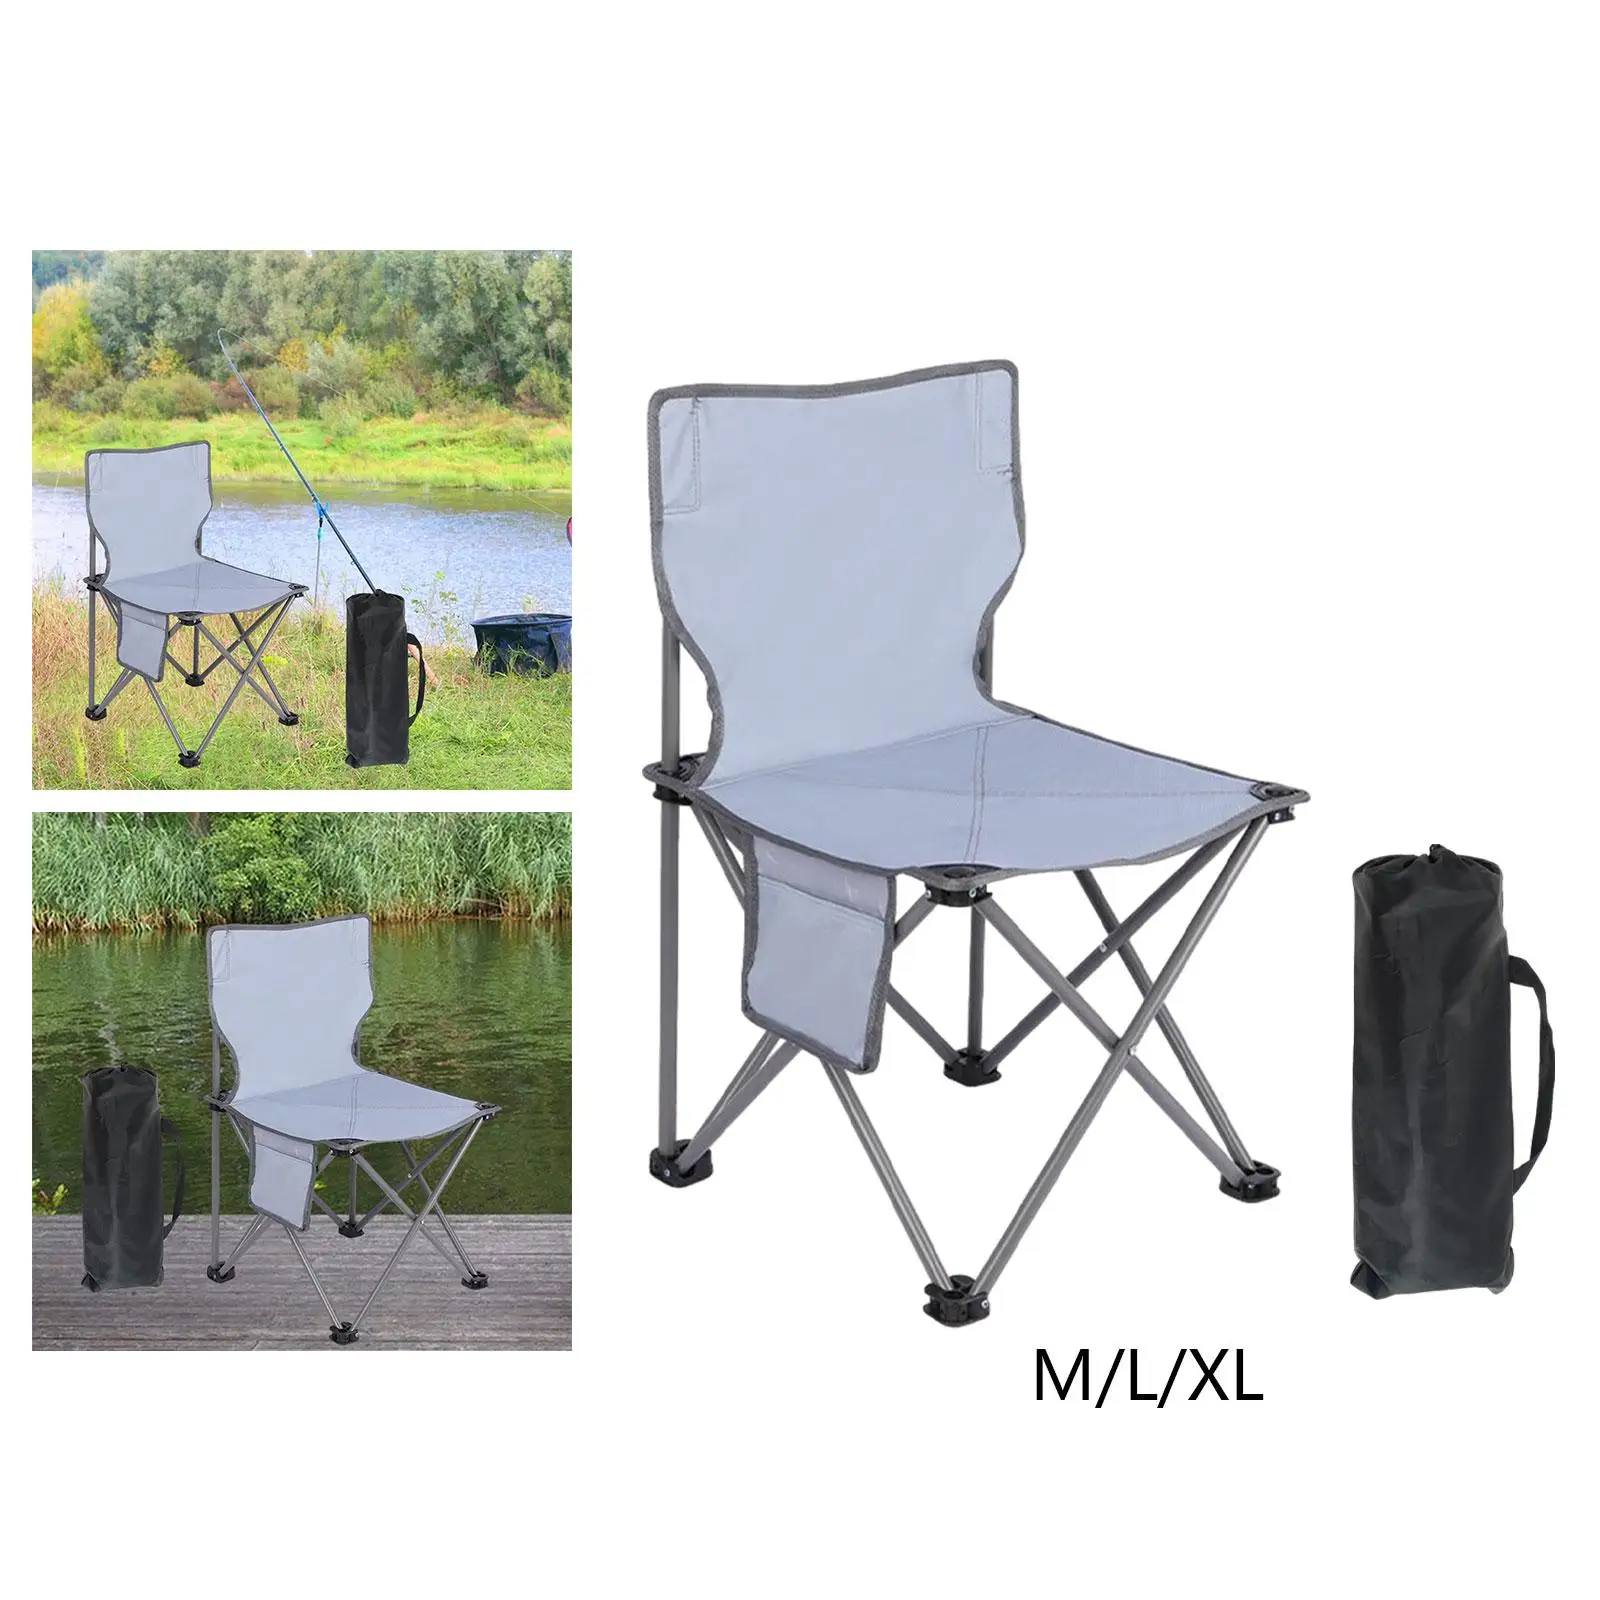 Portable Camping Chair High Back Folding Chair for Garden Patio Backpacking